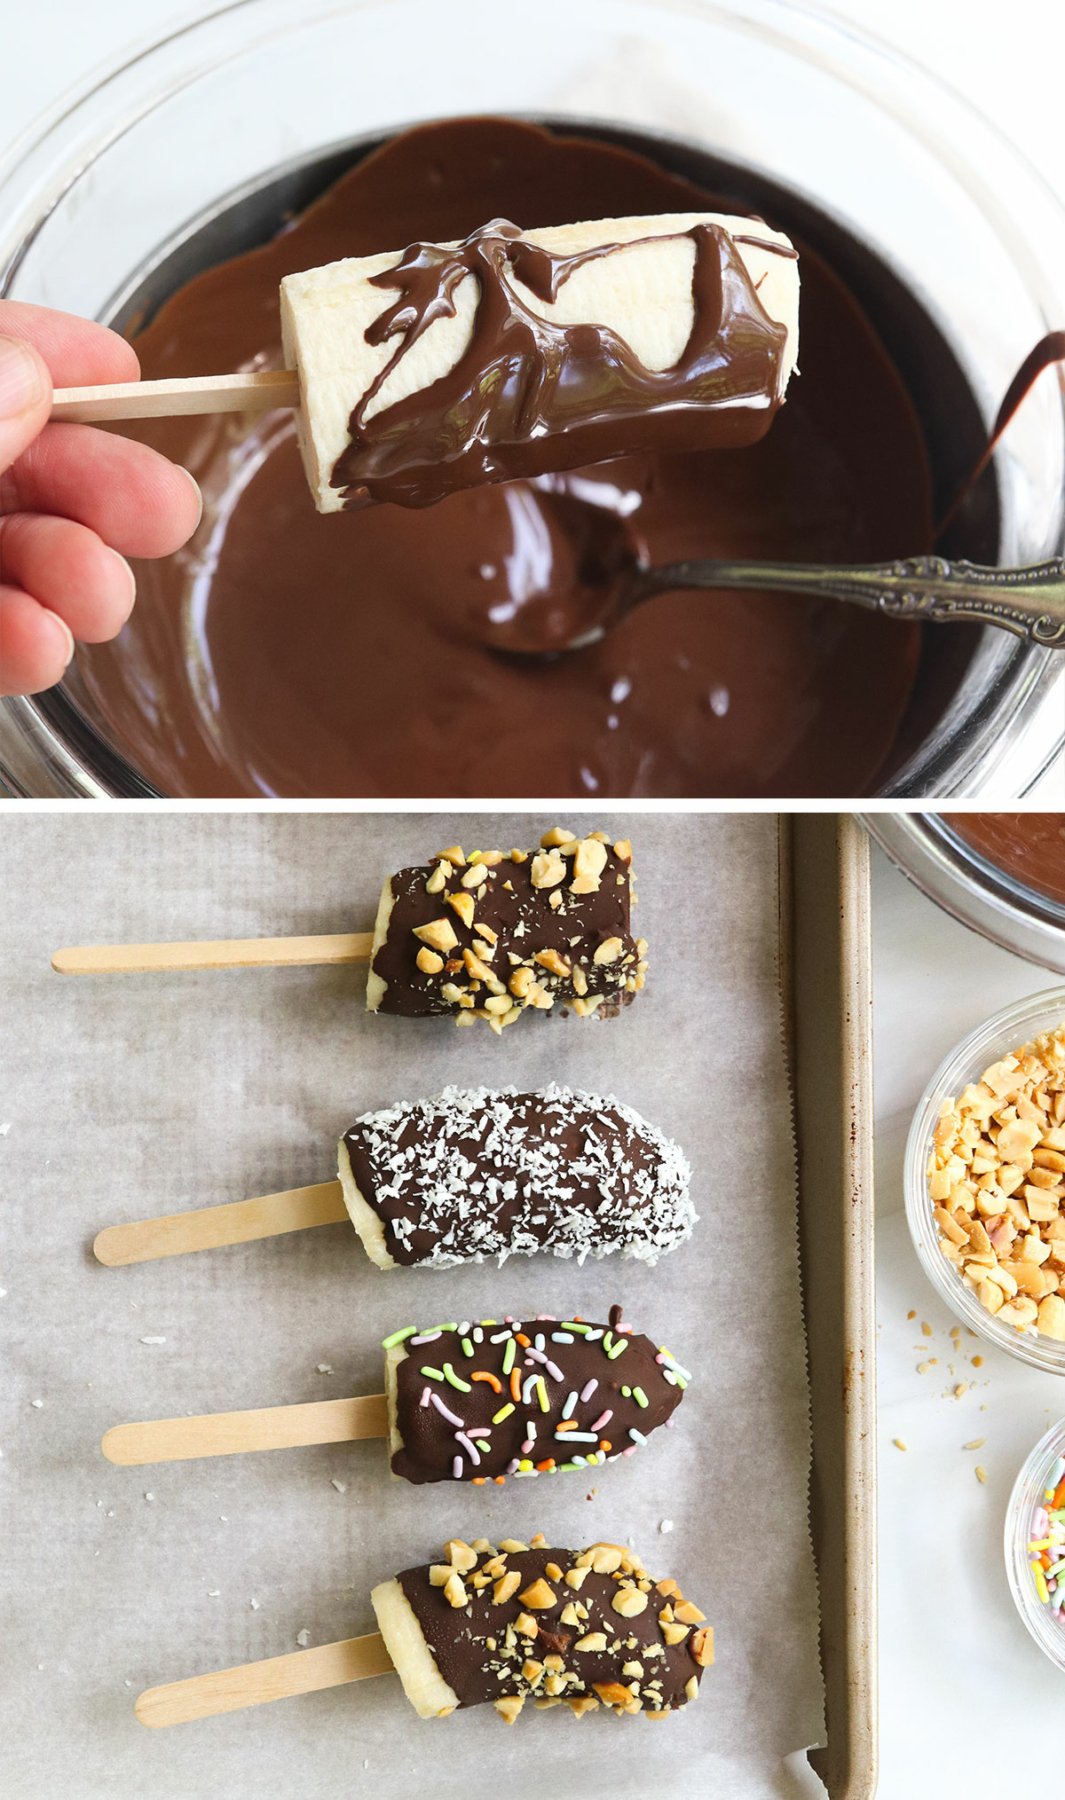 melted chocolate added to frozen banana and coated in toppings.